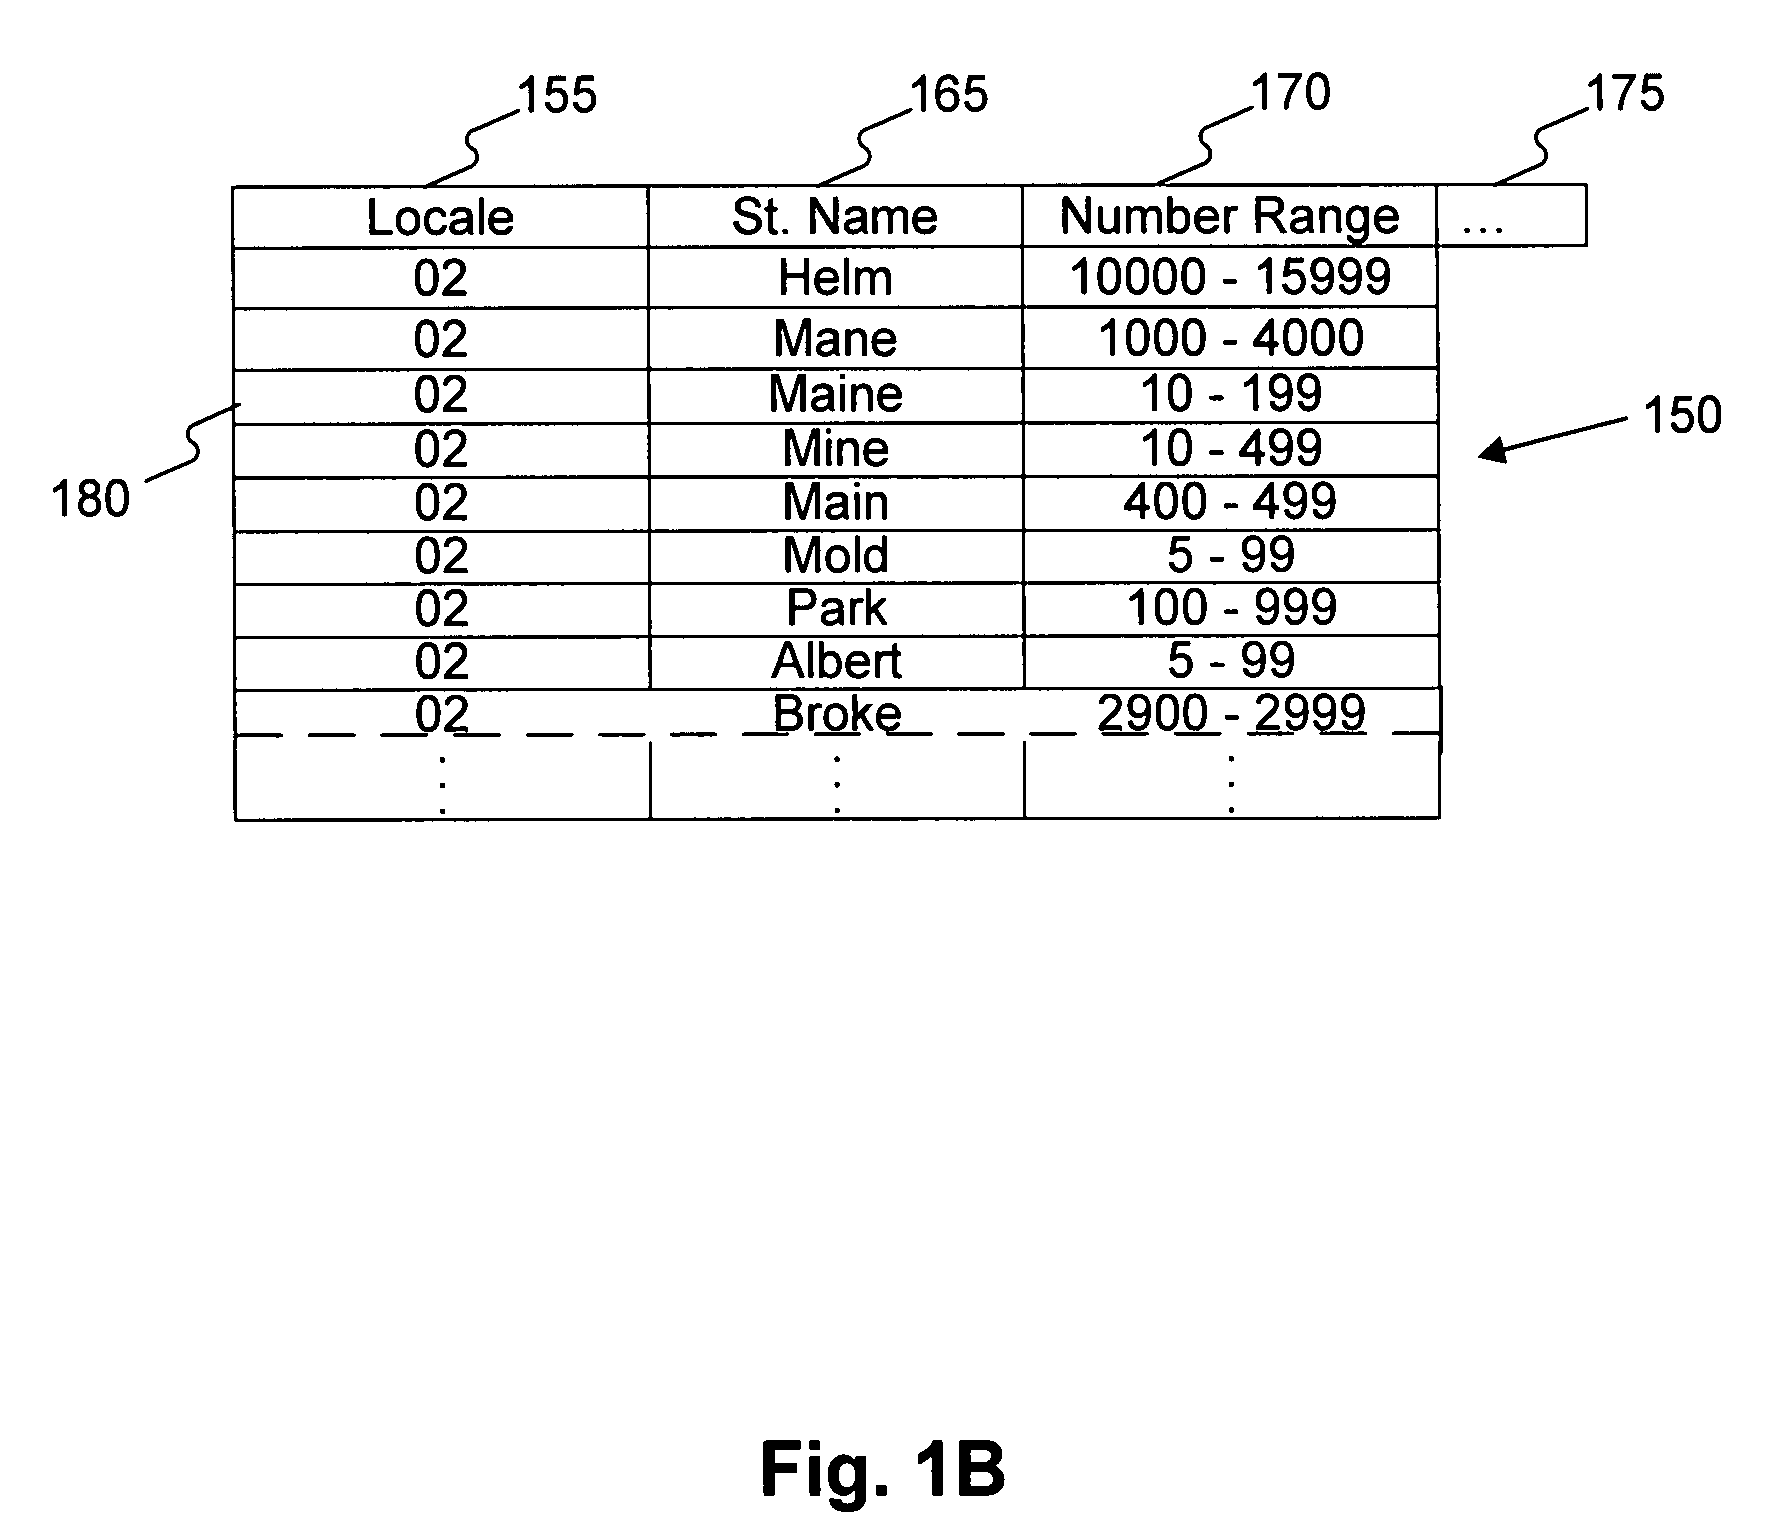 Systems and methods for validating an address